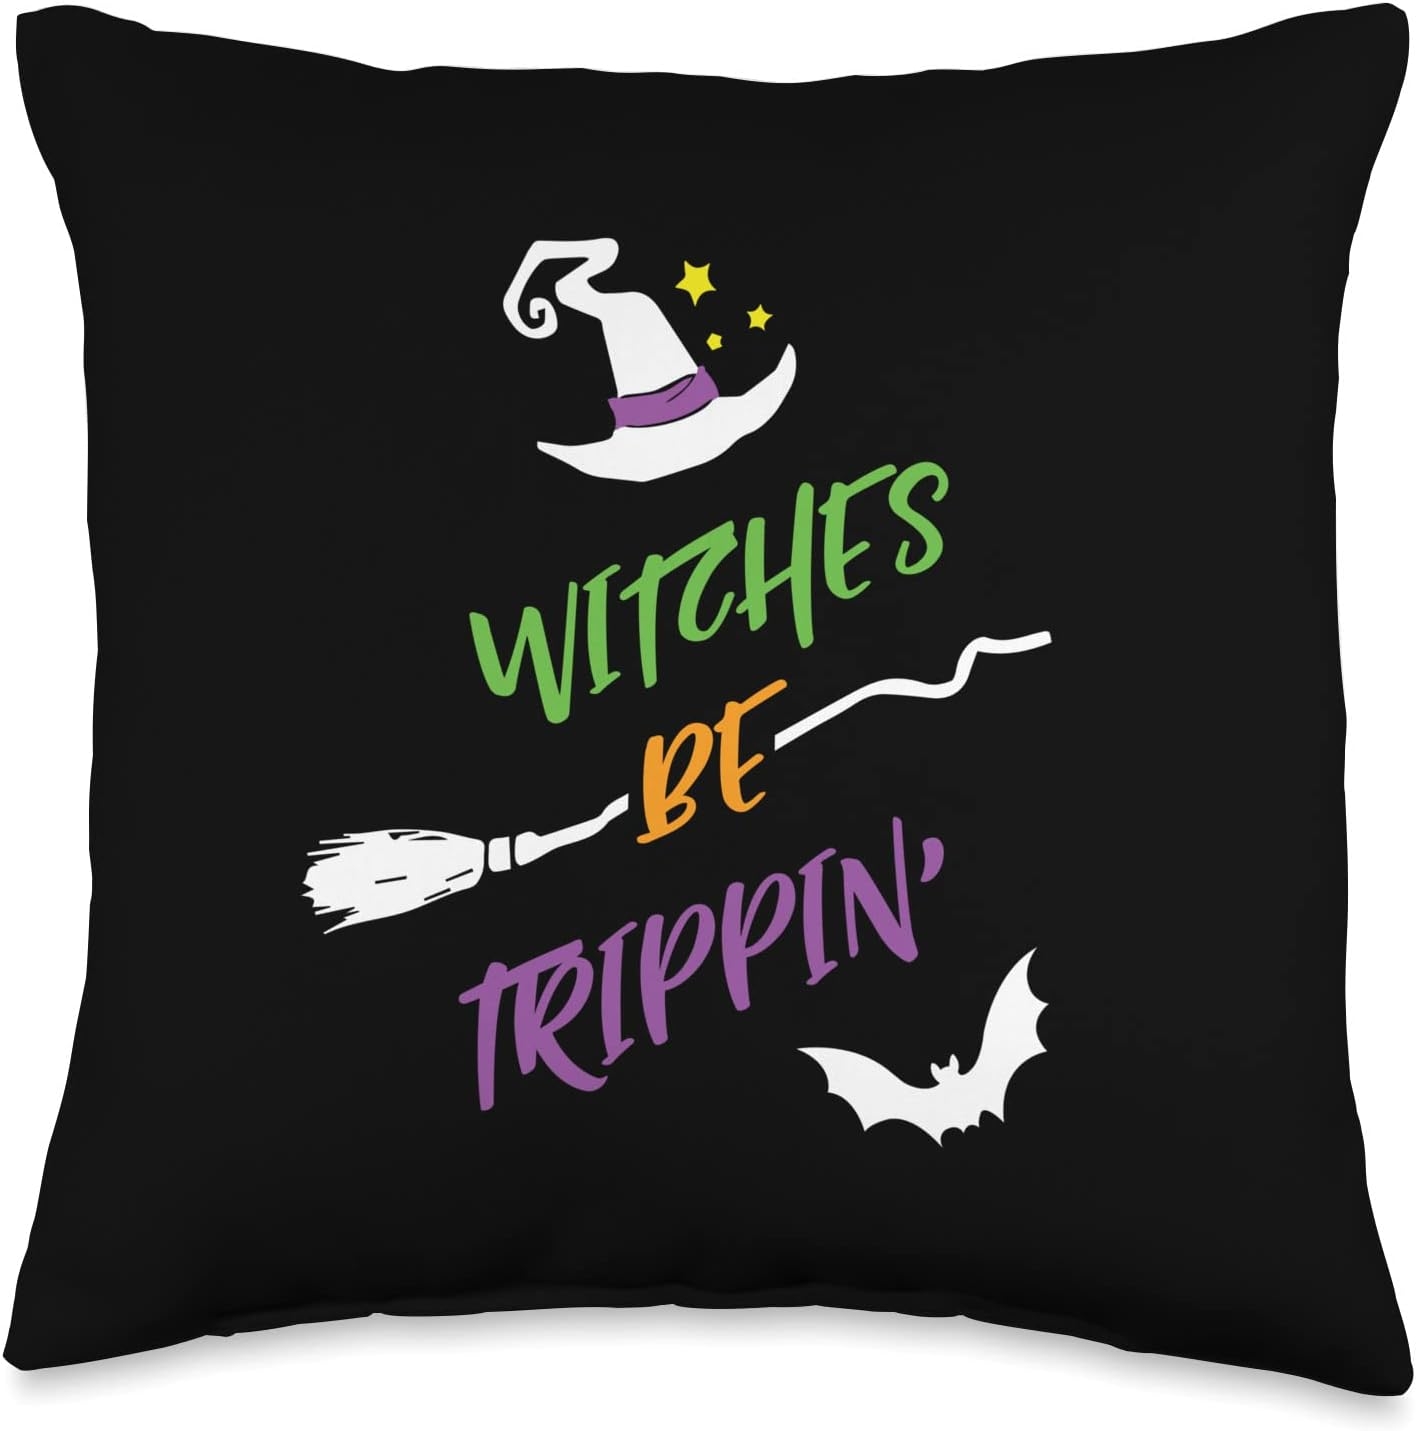 Halloween Witches Be Funny Witcht Witches Be Trippin’ Funny Halloween Magic Spell Throw Pillow, 18×18, Multicolor   price